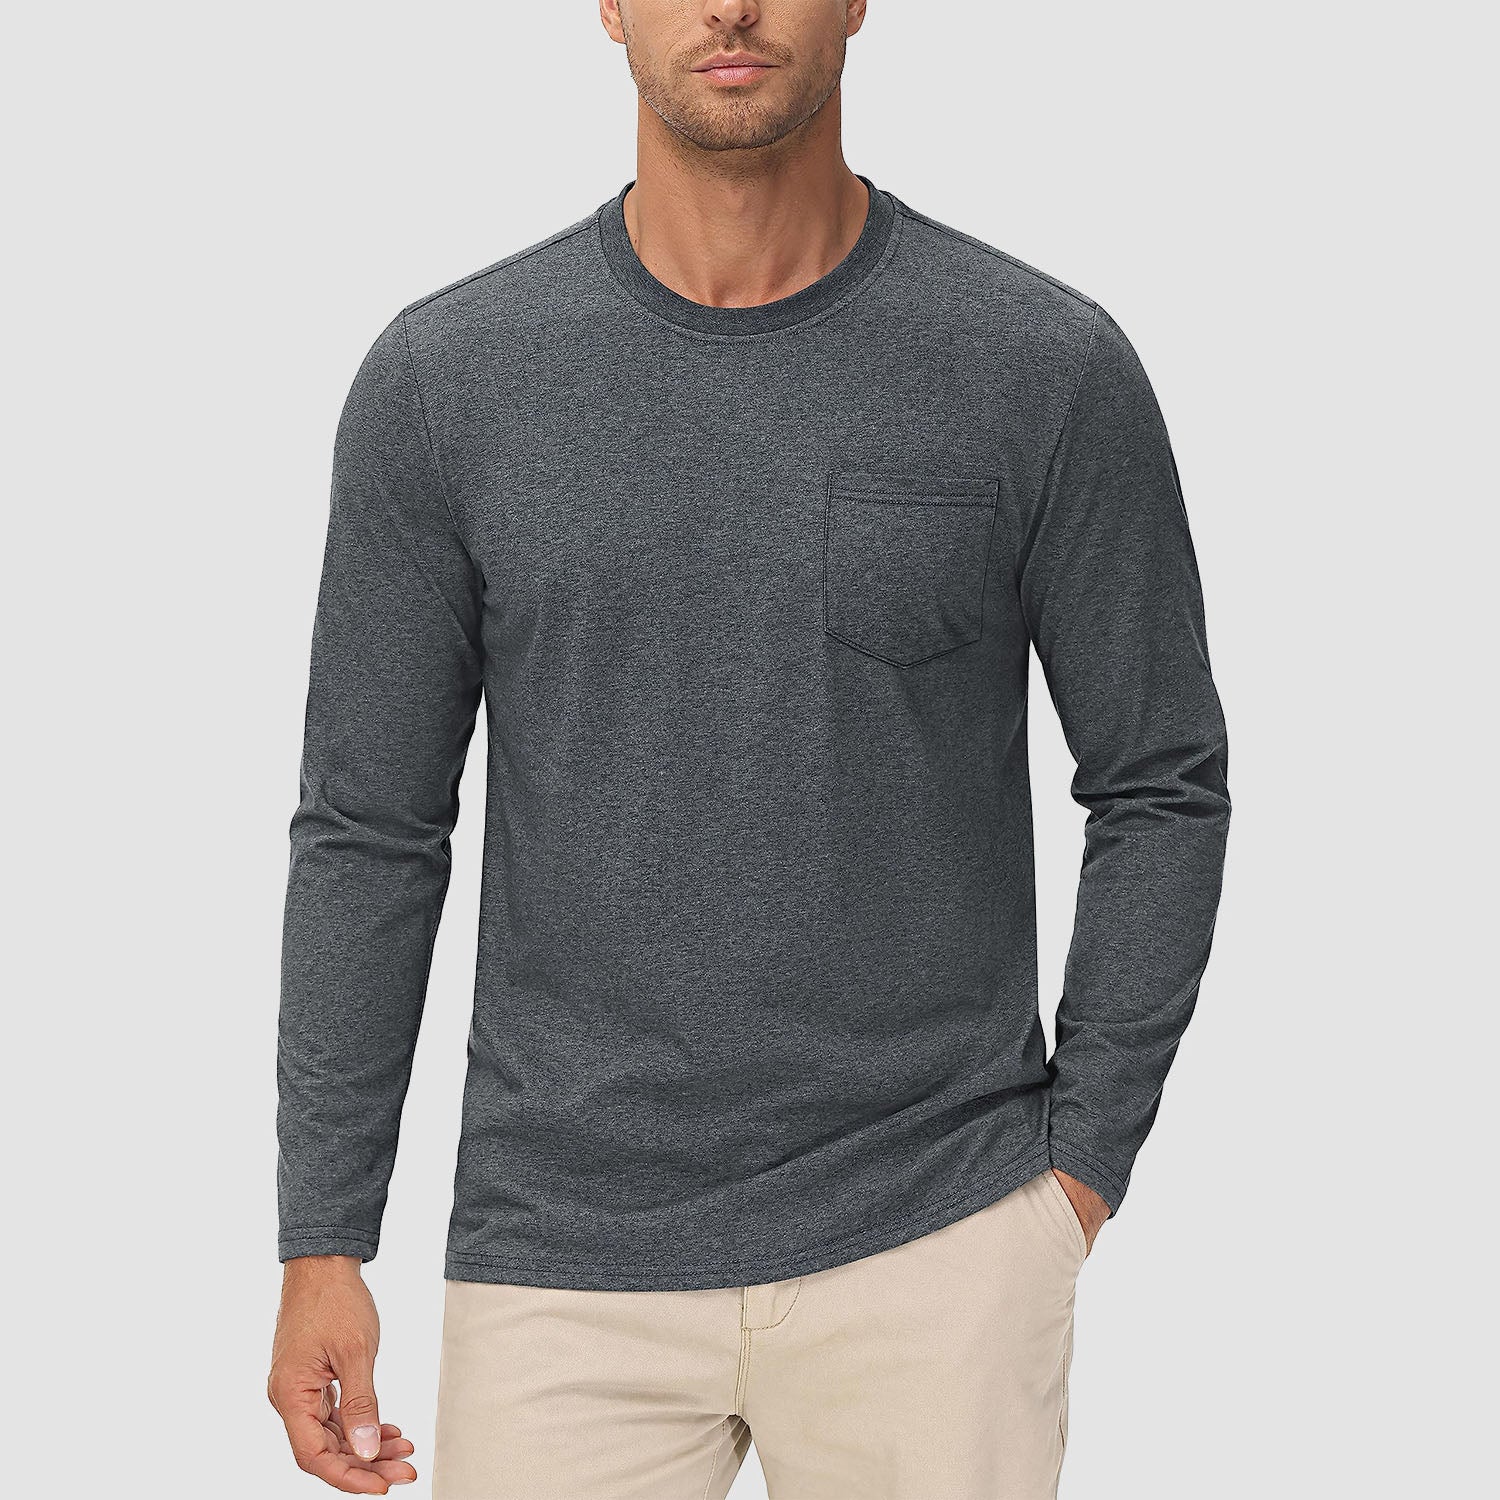 Men's Long Sleeve Shirts with Pocket Cotton Crew Neck Shirts Casual Lightweight T-Shirts